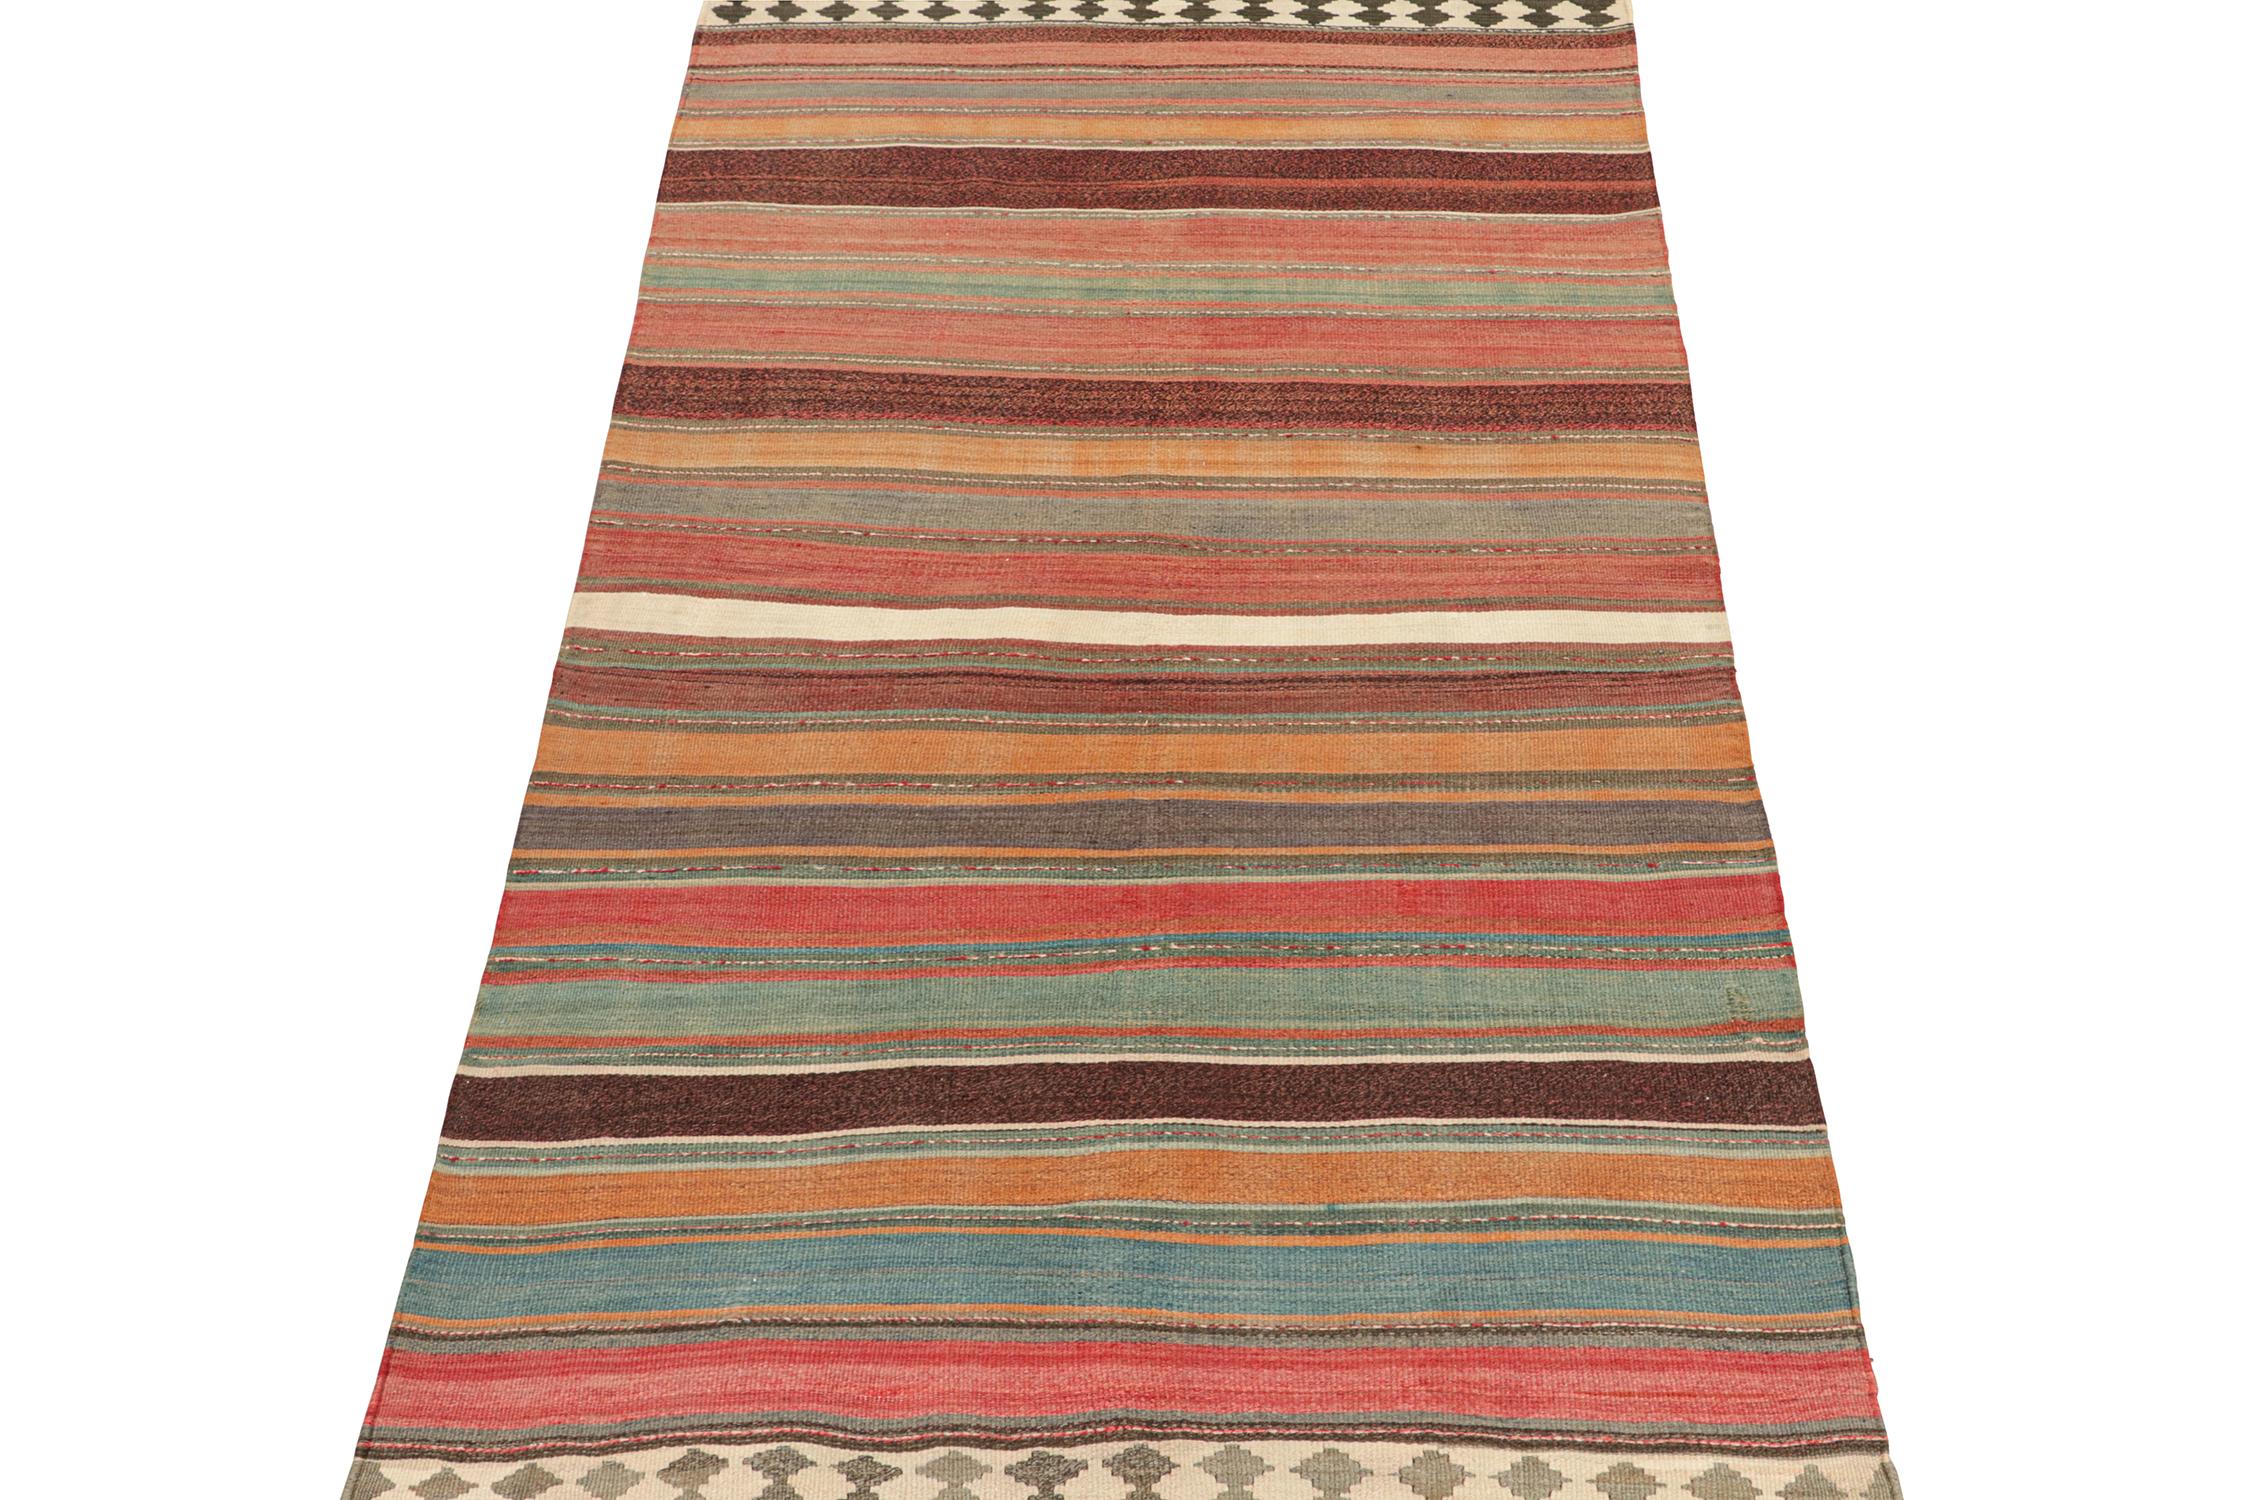 This vintage 5x9 Persian kilim is believed to be a Shahsavan tribal rug. Handwoven in wool circa 1950-1960, these are sometimes called Northwest designs—a well-known Persian provenance. 

Further on the Design:

This design favors a polychromatic